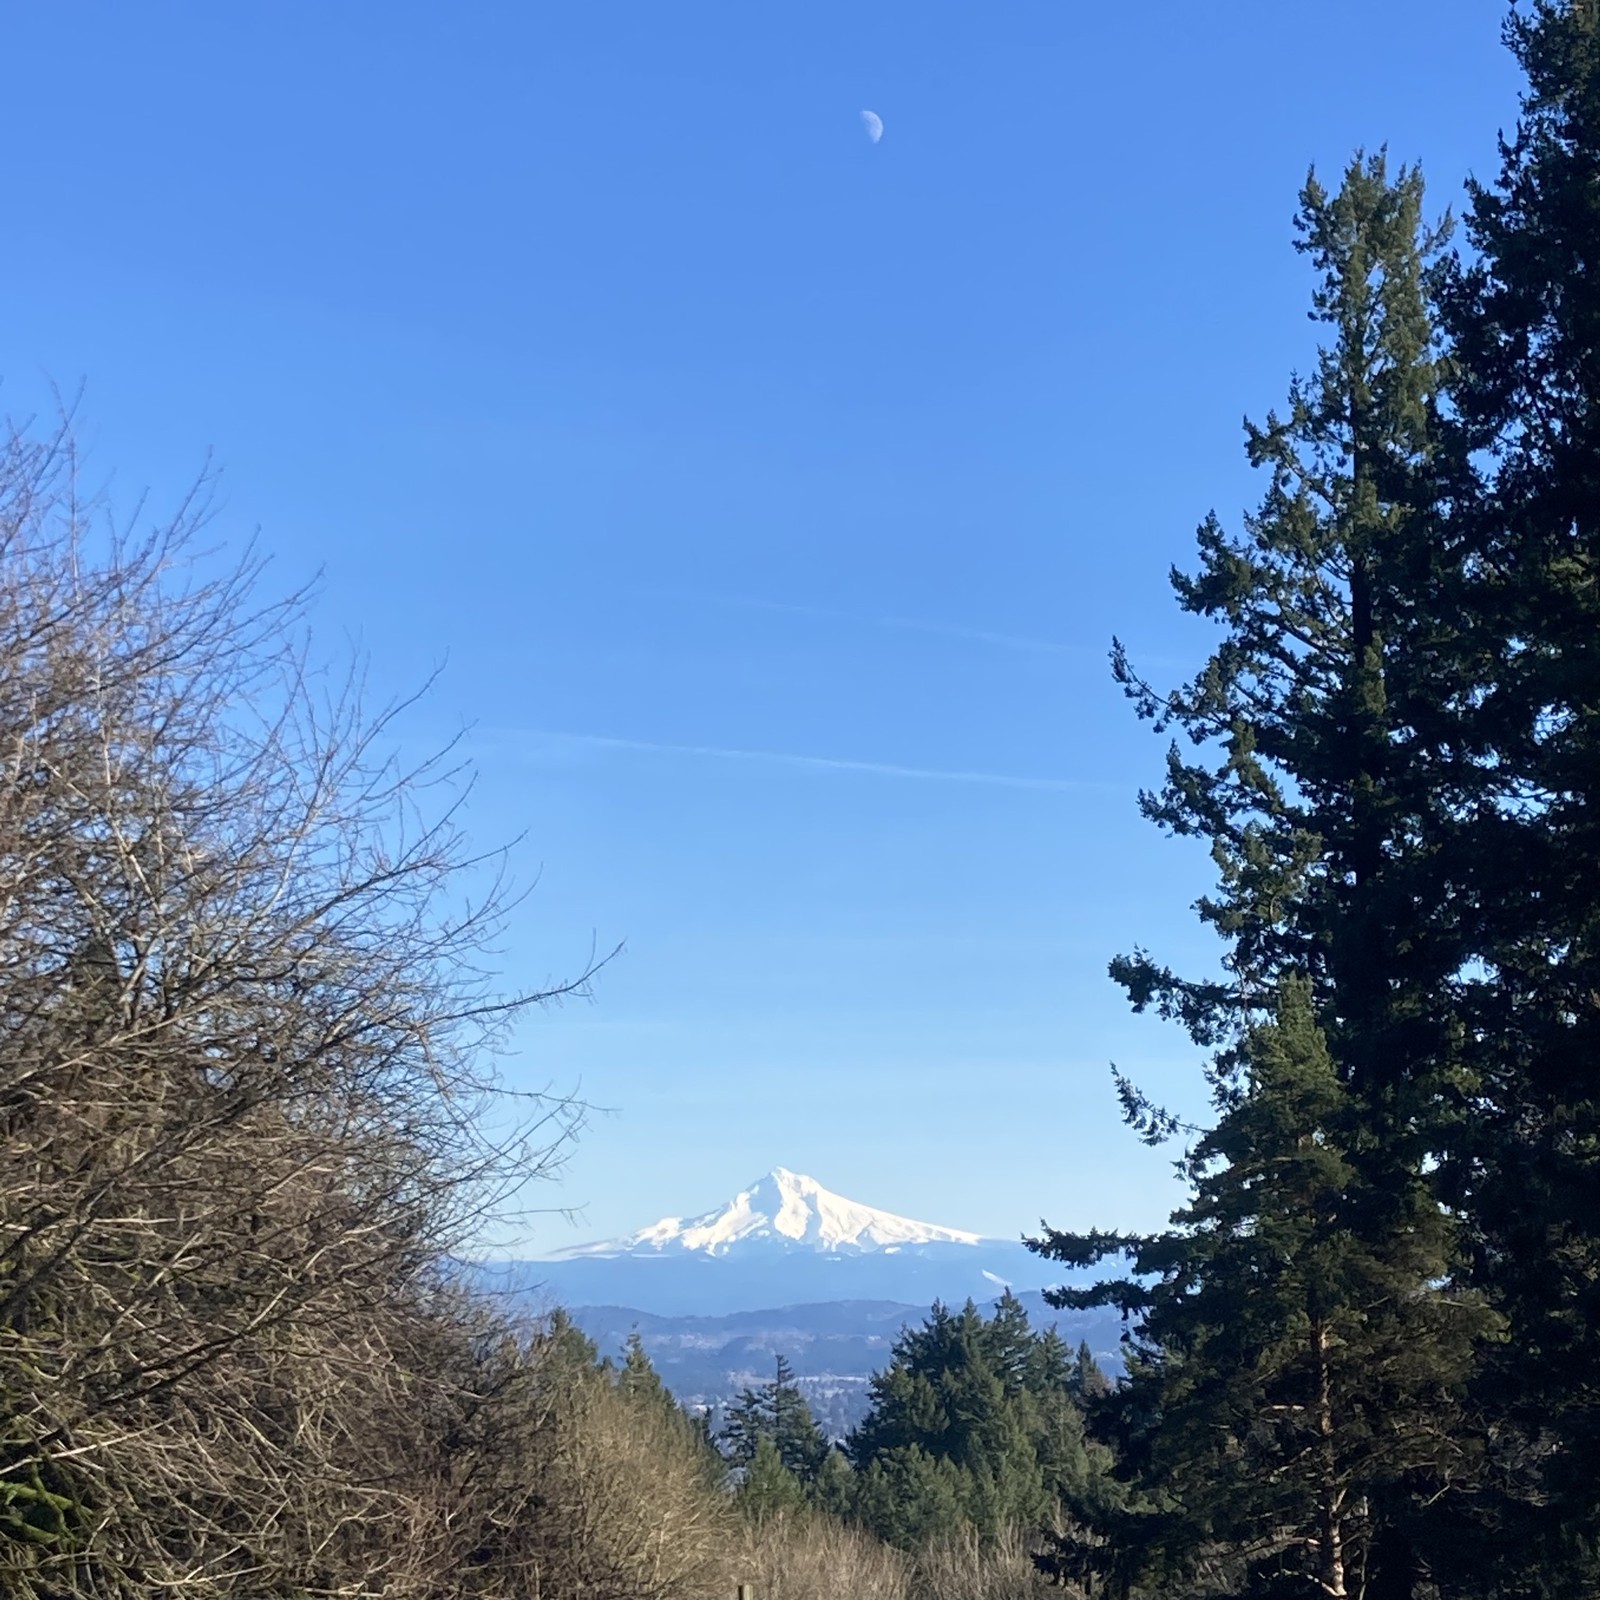 View from Council Crest toward Mt. Hood, which is NOT visible.